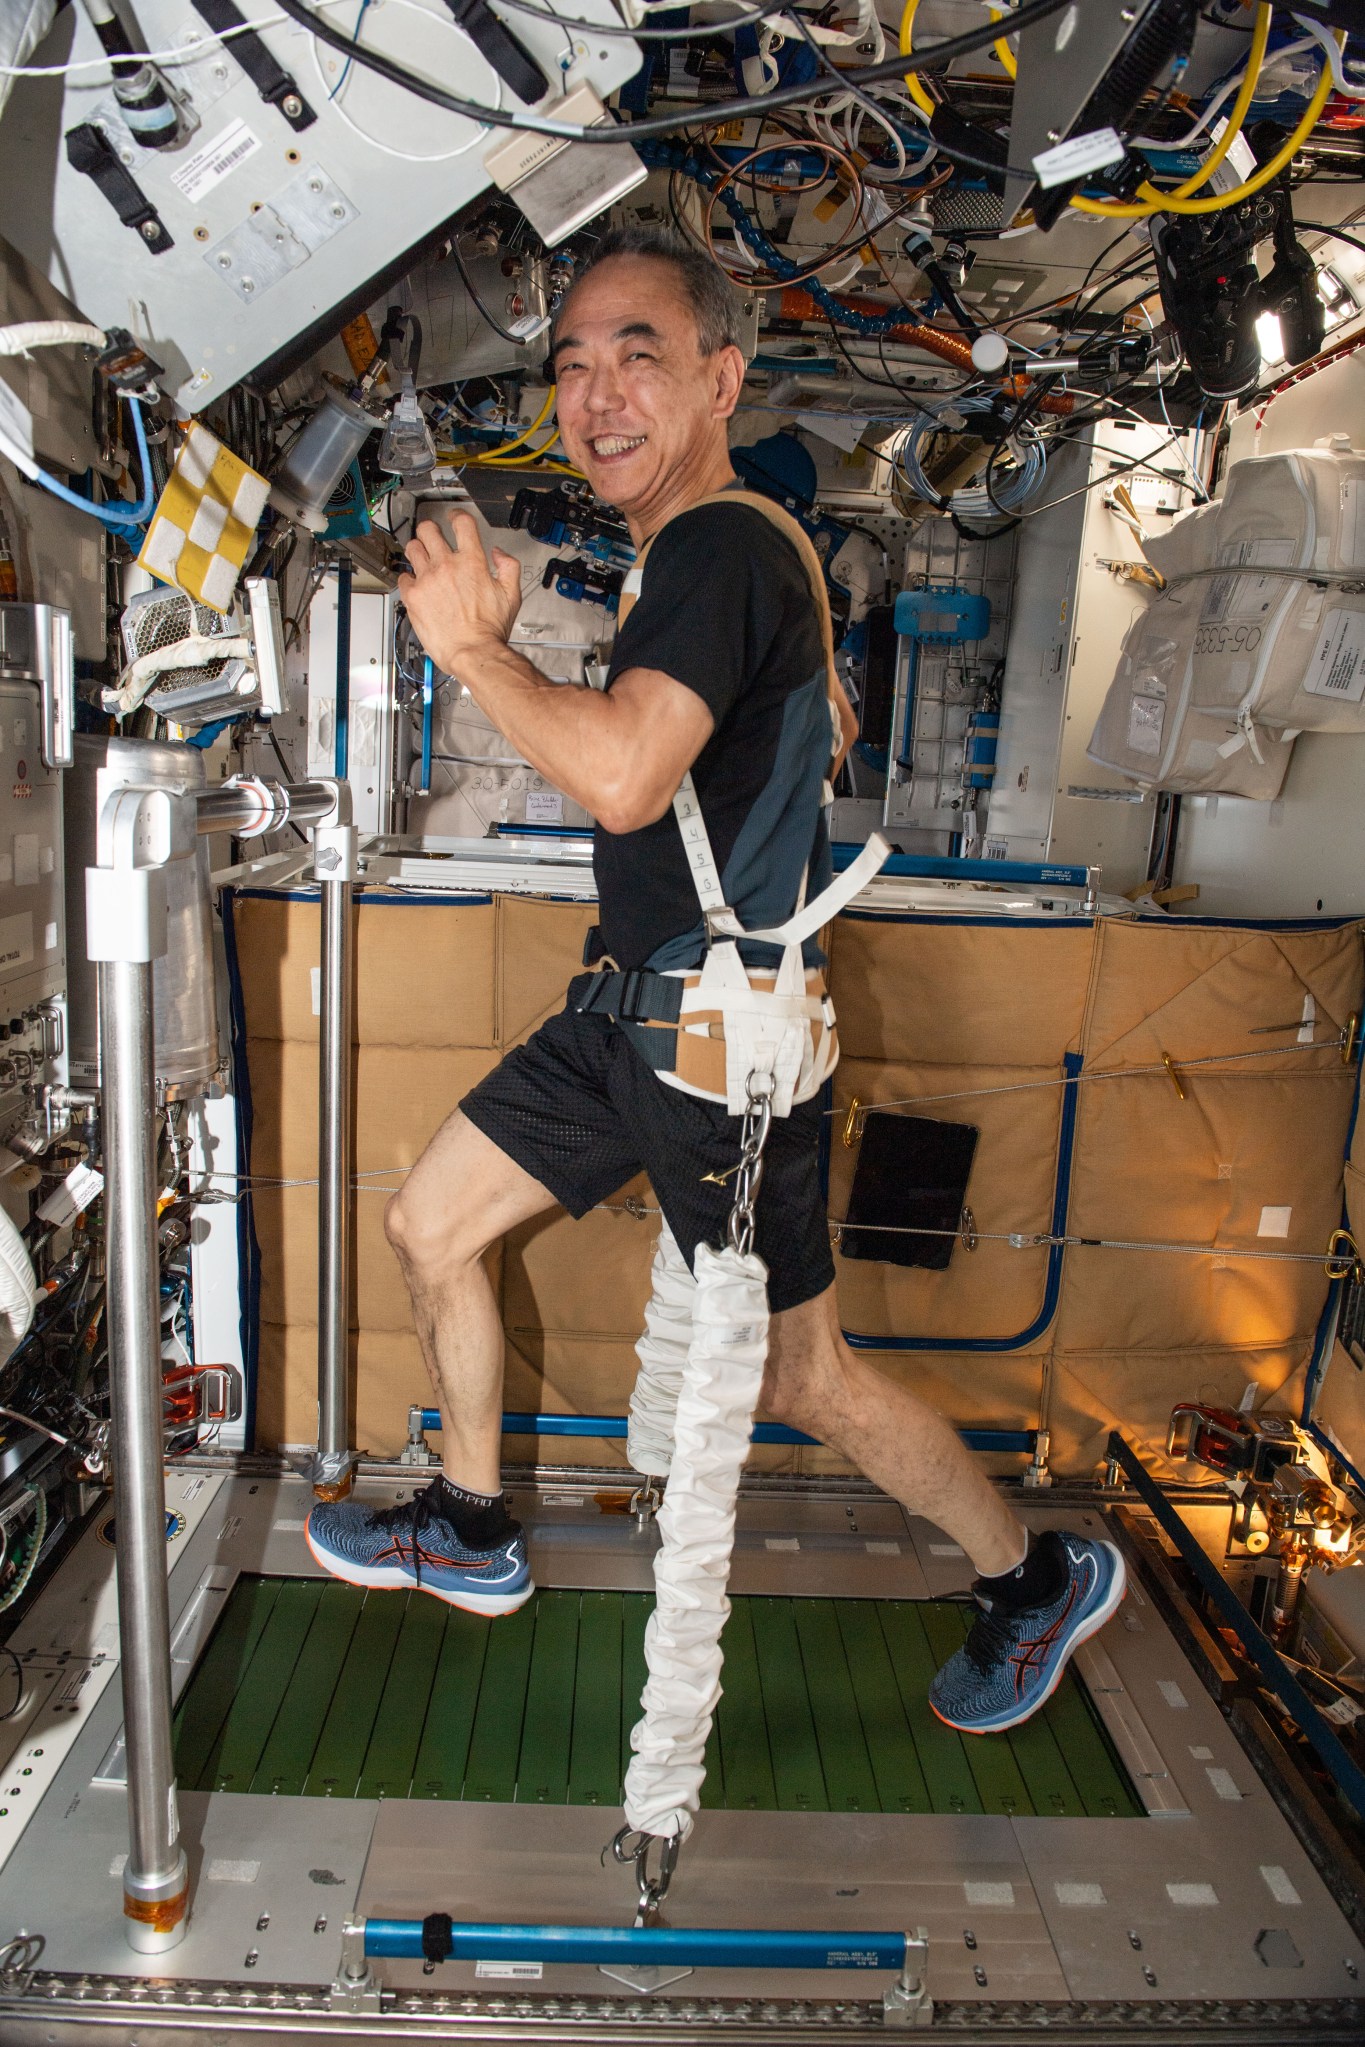 Expedition 70 Flight Engineer and JAXA (Japan Aerospace Exploration Agency) astronaut Satoshi Furukawa jogs on the Combined Operational Load Bearing External Resistance Treadmill (COLBERT) inside the International Space Station's Tranquility module. COLBERT is designed to allow walking and running in a microgravity environment for maintaining crew cardiovascular fitness, muscular strength, and to exercise neurophysiological pathways and reflexes that are required to walk once returned to Earth.